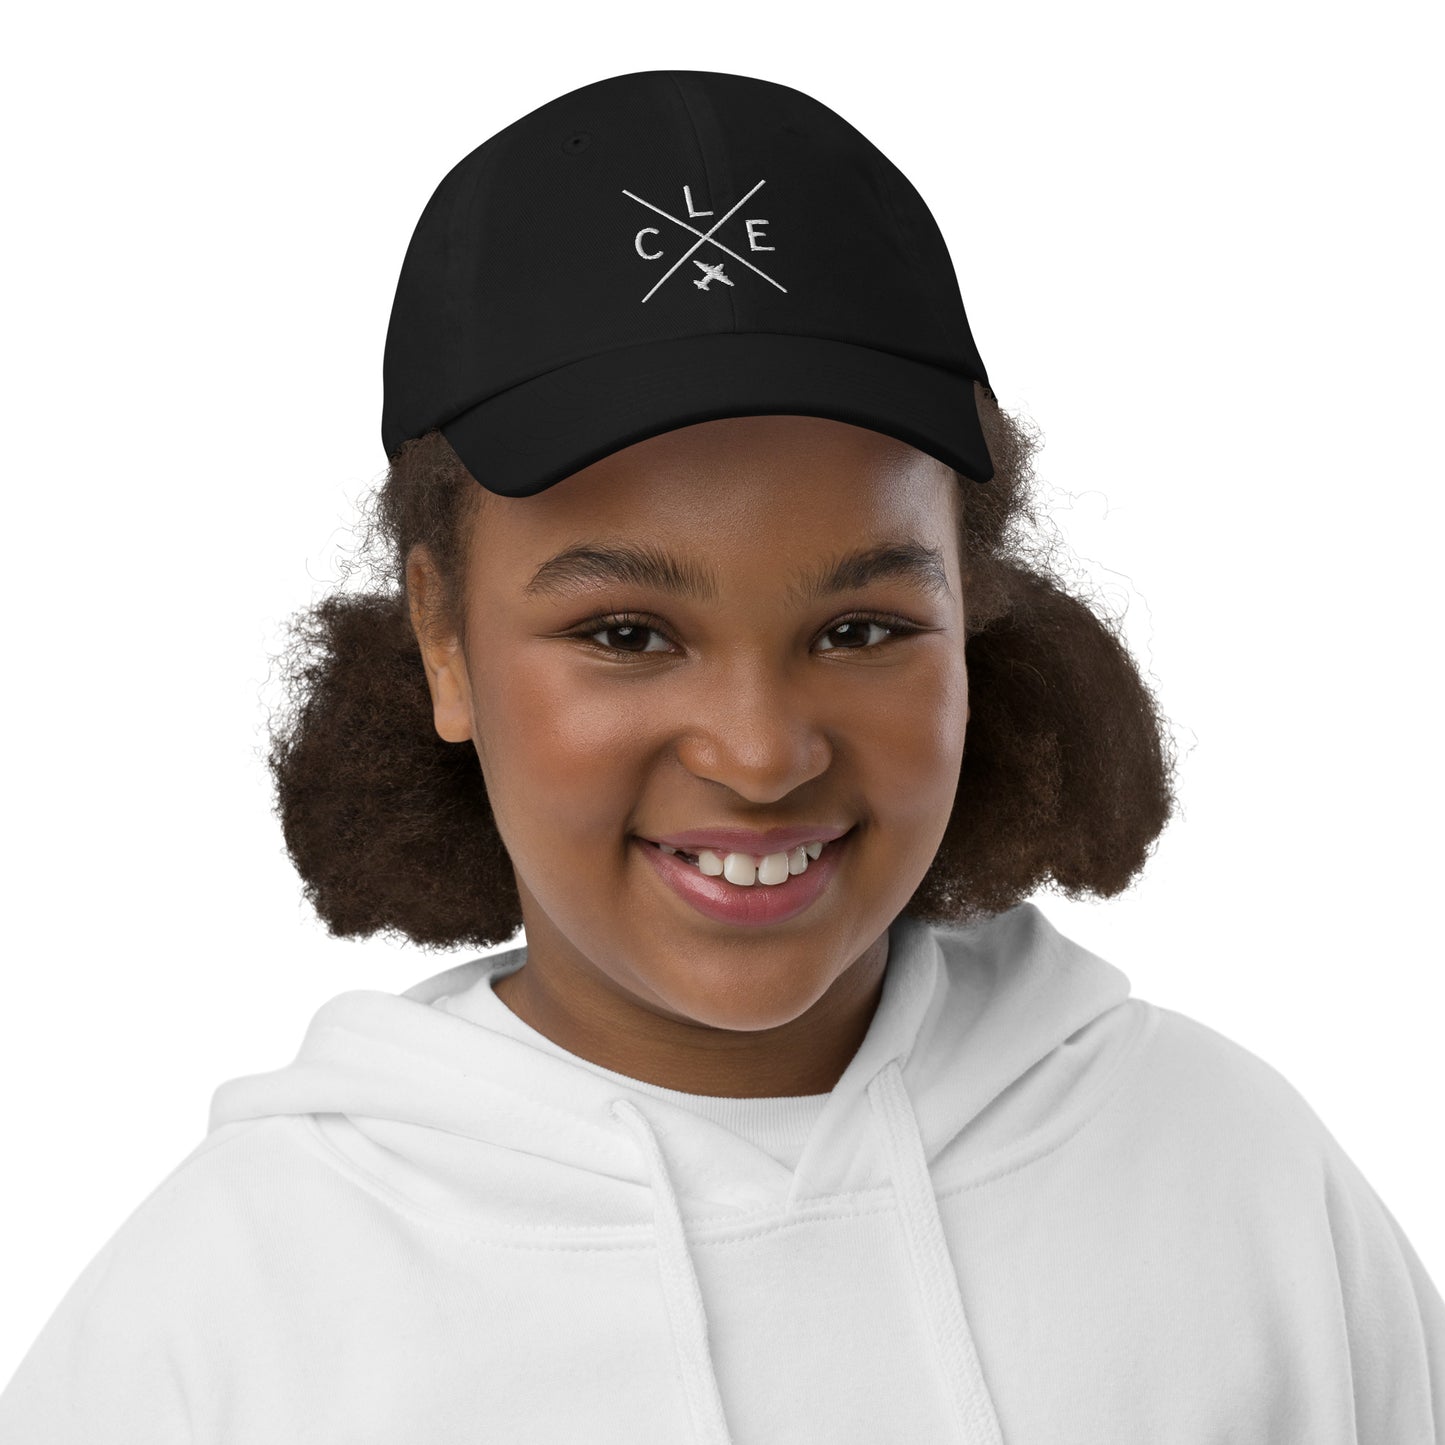 Crossed-X Kid's Baseball Cap - White • CLE Cleveland • YHM Designs - Image 02